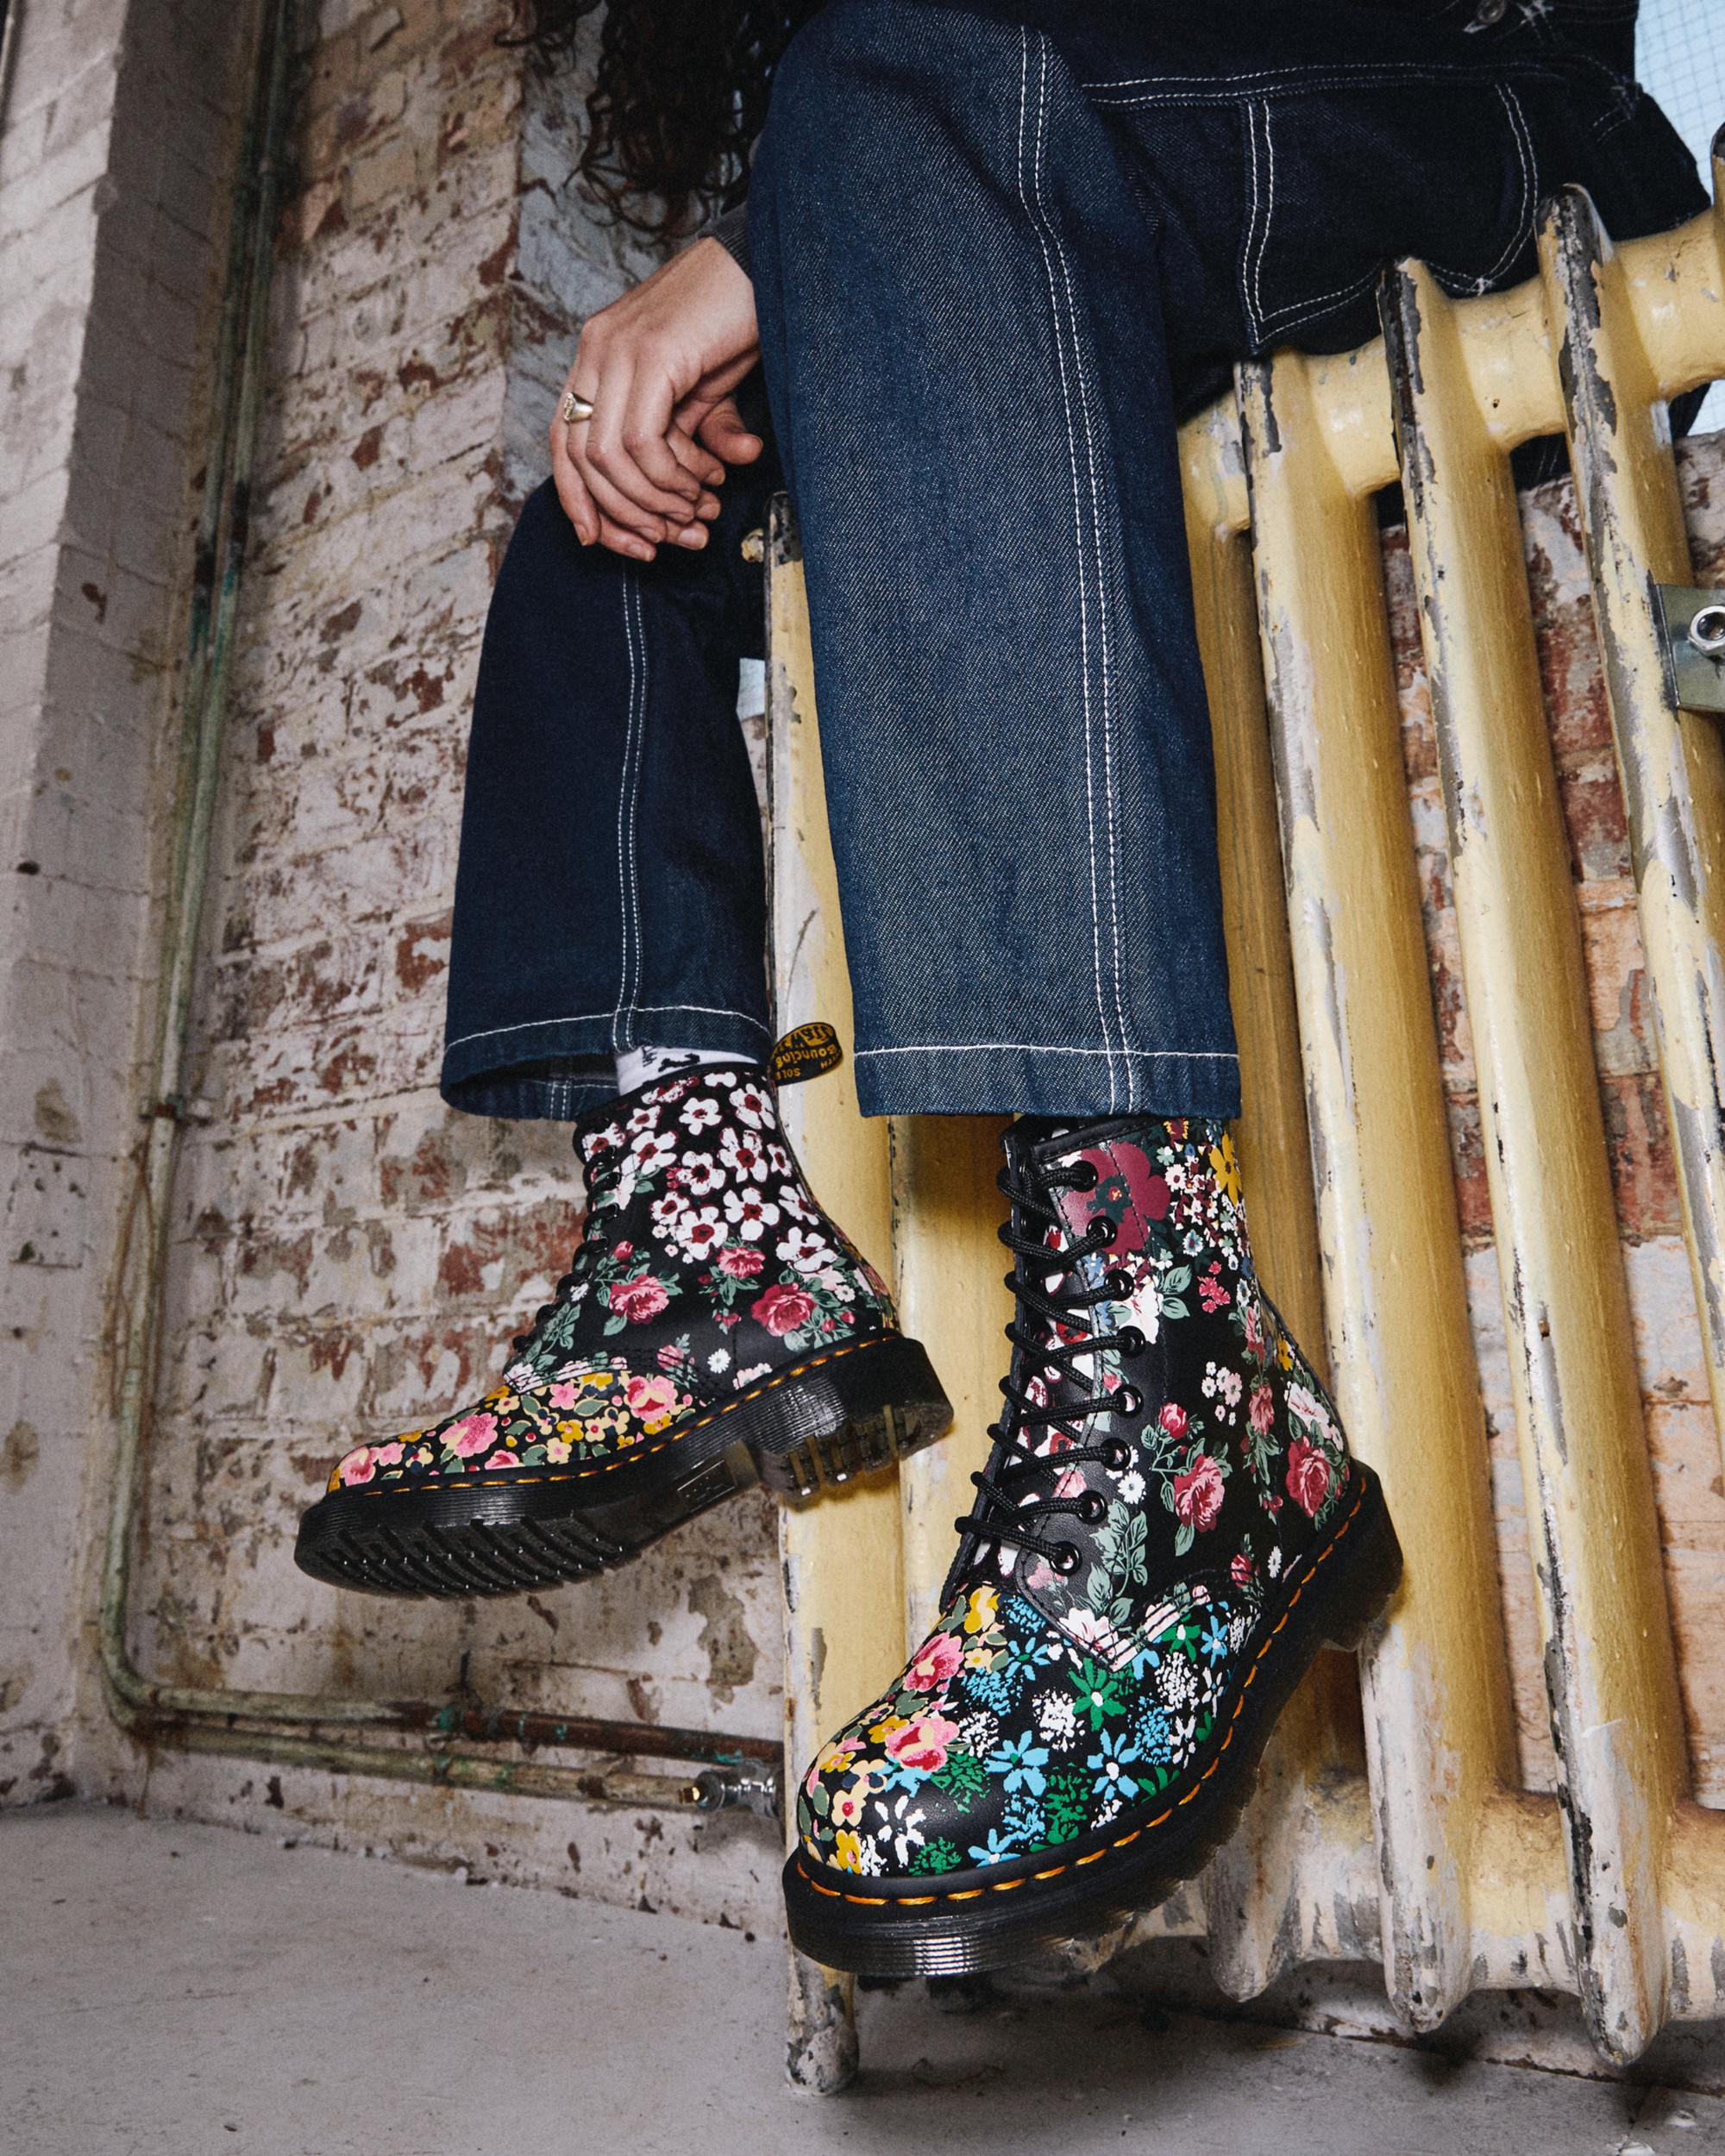 Lace White Leather Pascal 1460 in Dr. Up Boots Mash Up Floral | Martens